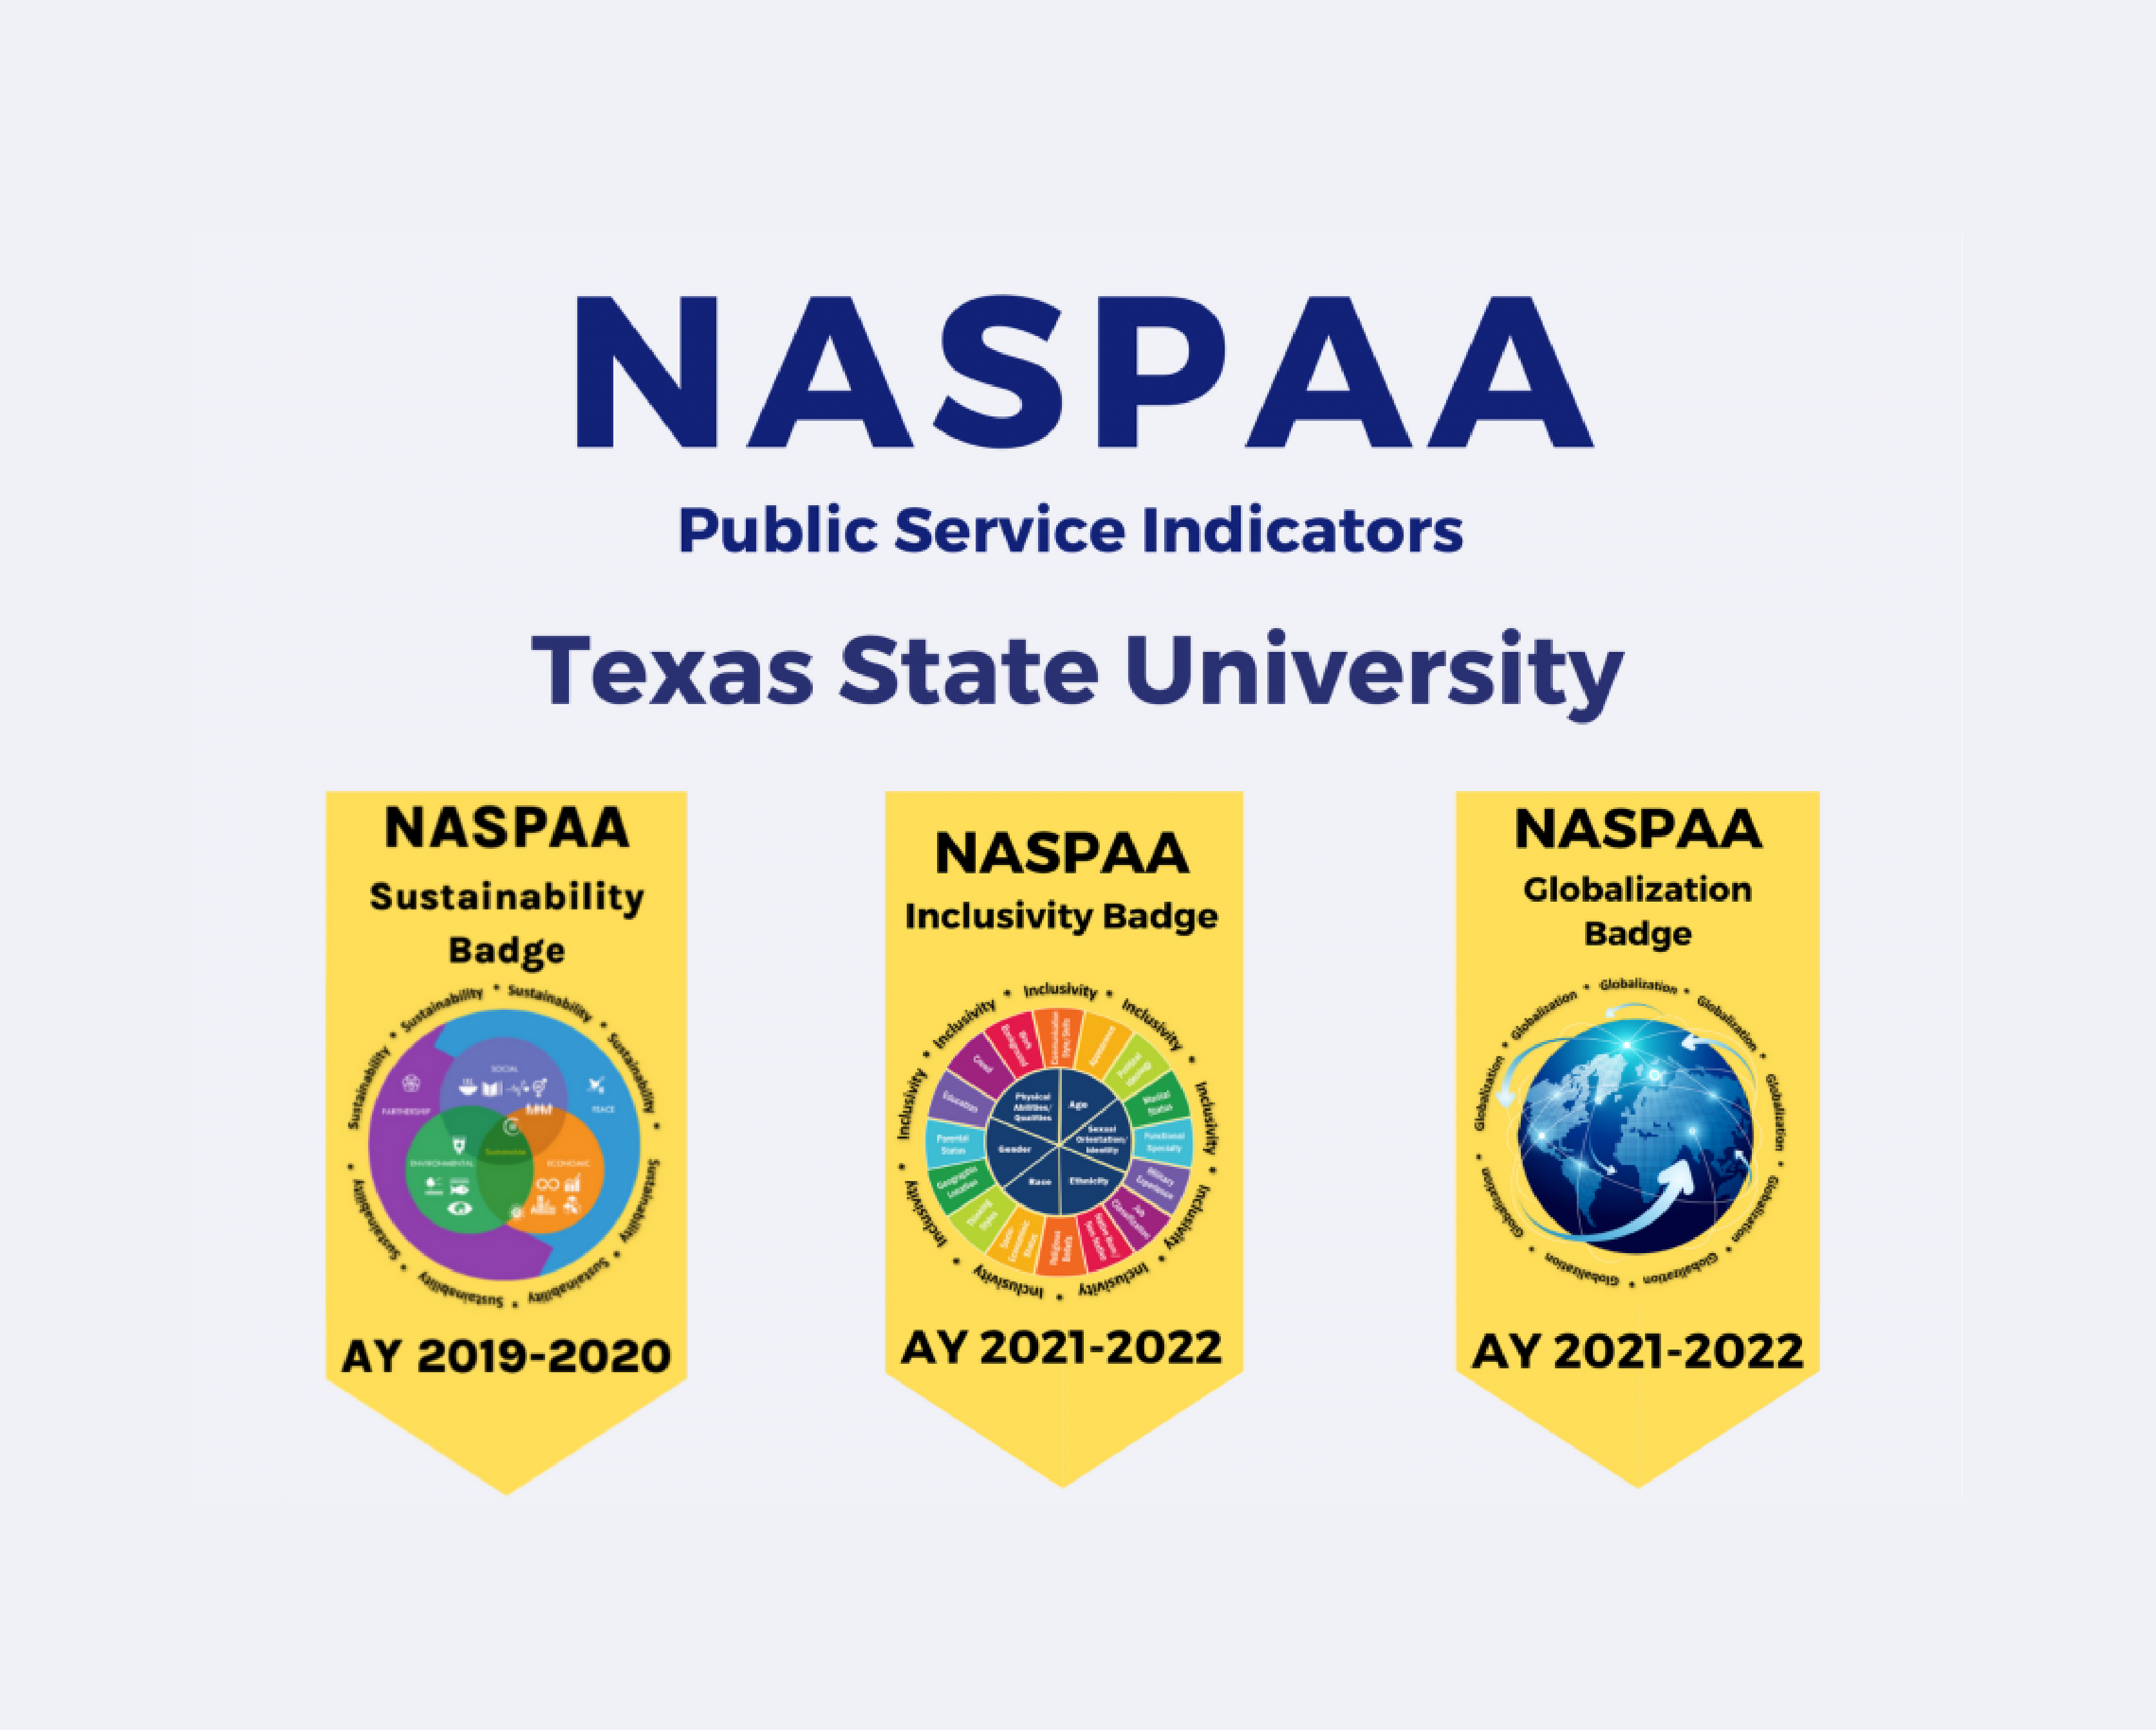 TXST's NASPAA badges in sustainability, inclusivity, and globalization.